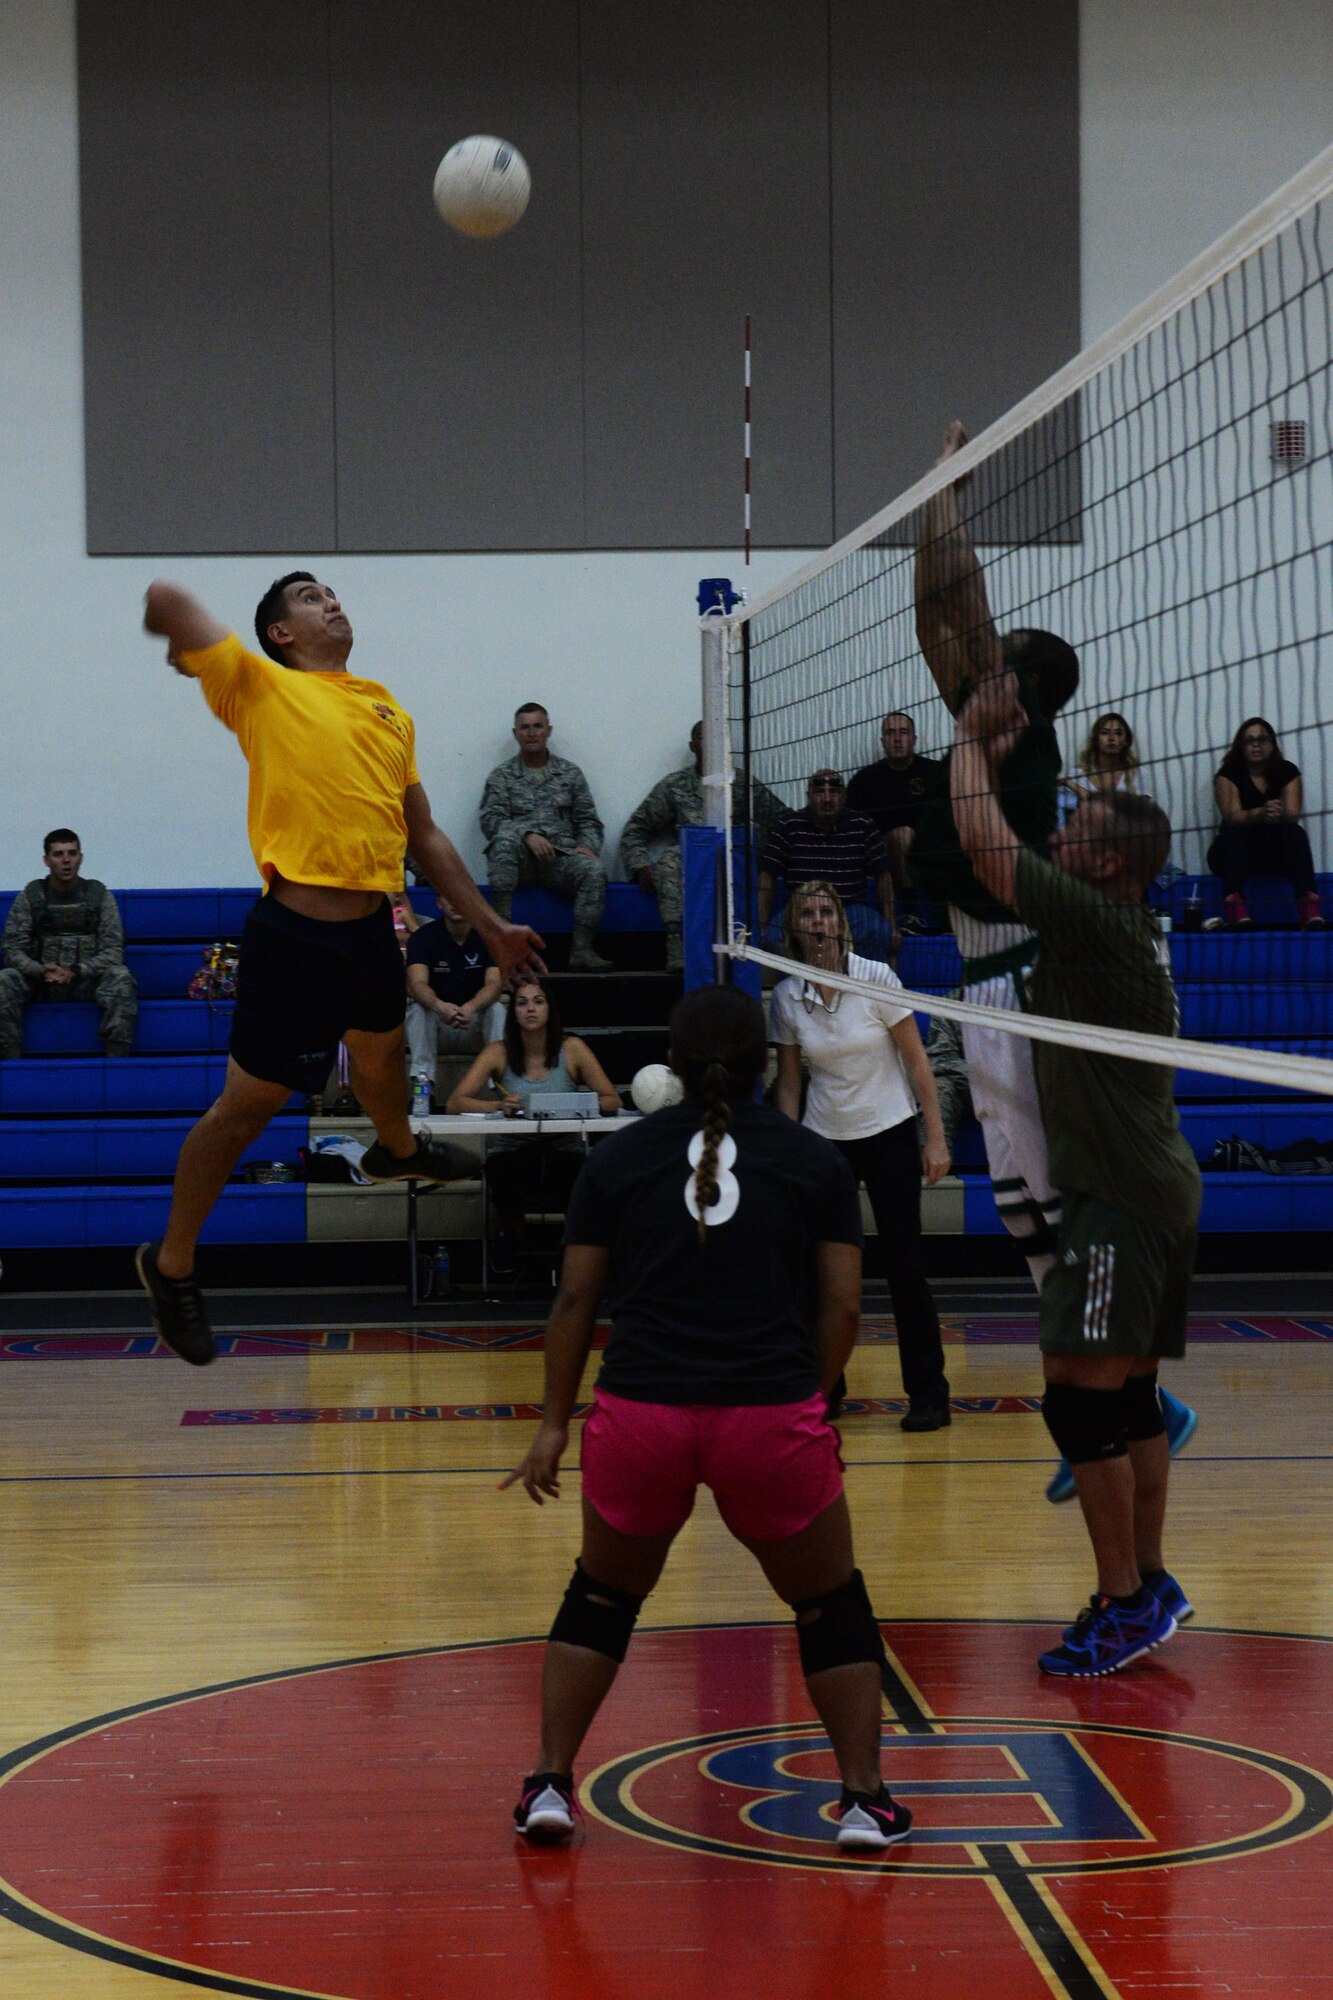 James Dela Pena, 36th Operations Support Squadron, attempts to spike a ball during the 2015 intramural volleyball championship game Sept. 29, 2015, at Andersen Air Force Base, Guam. Airmen assigned to the 36th Security Forces Squadron took home the first place trophy after winning the tiebreaker set 15-7. (U.S. Air Force by Senior Airman Joshua Smoot/Released)